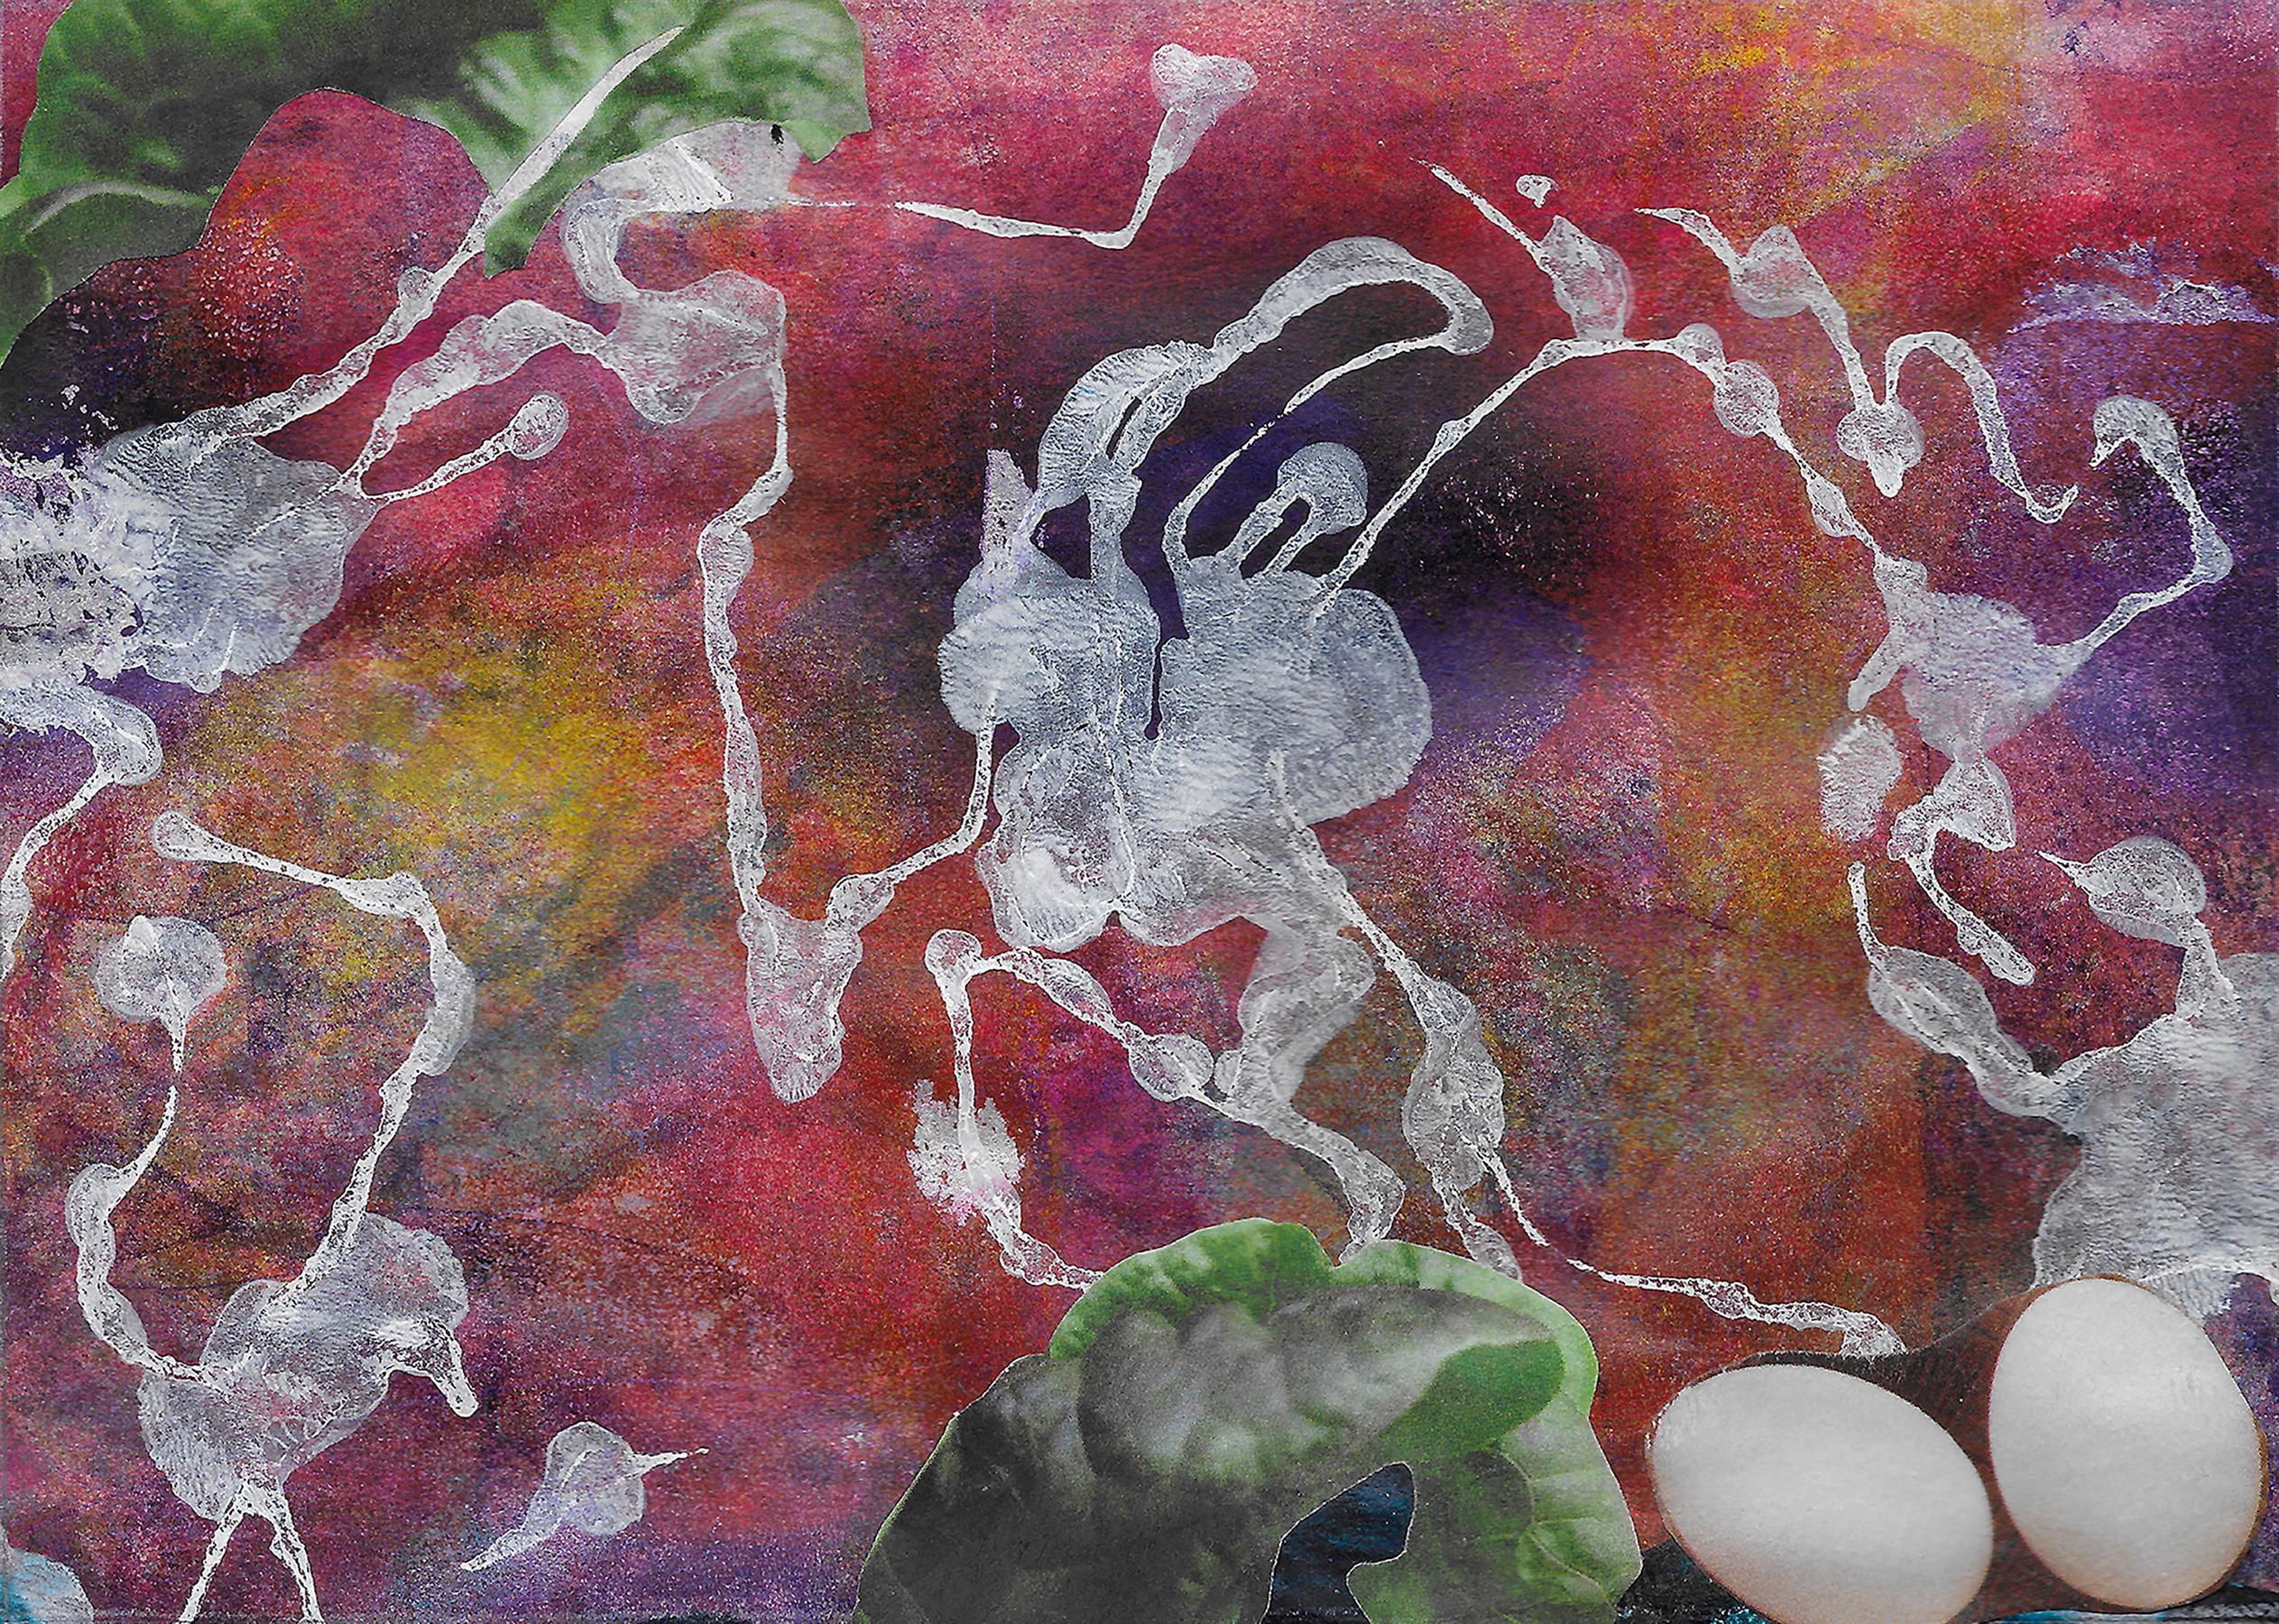 Monica DeSalvo’s “Zigzag” is a diptych with two 4.25 x 6 inch stacked abstract collages on paper. Green lettuce, ivory and tan eggs, and whimsical white markings dance over blurred fields of red, maroon, and magenta created with a Gelli plate. The